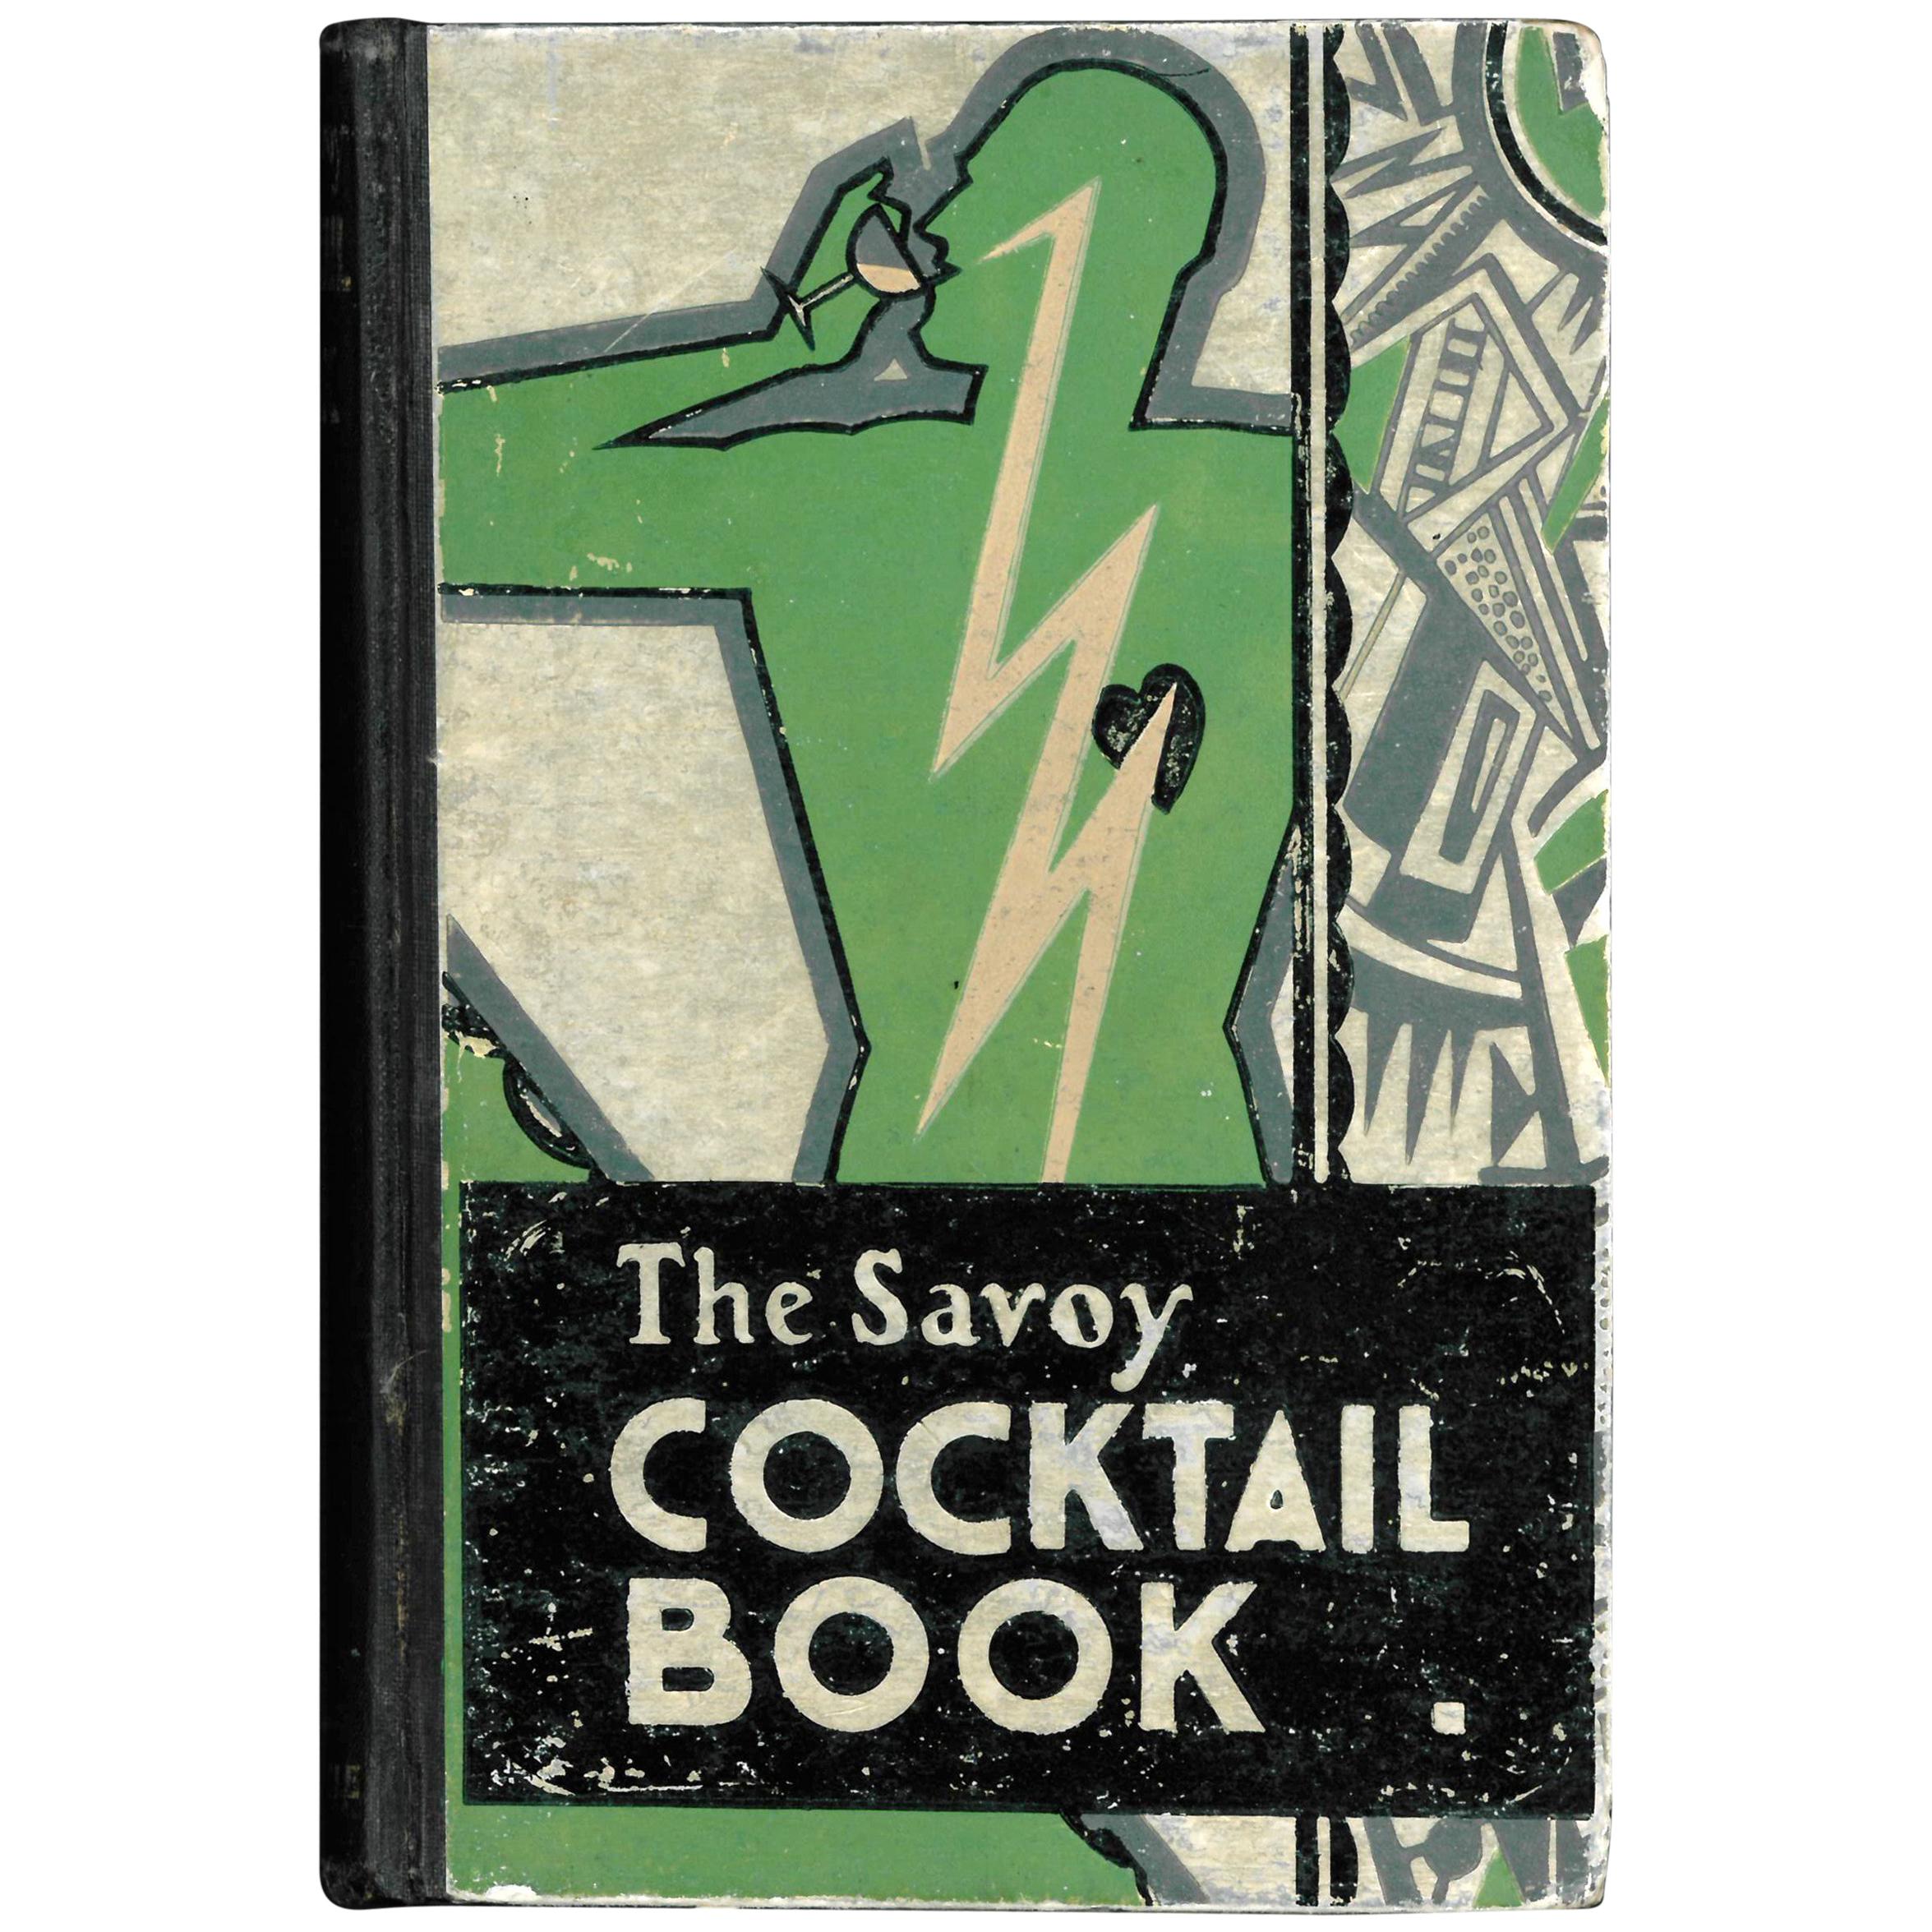 'The Savoy Cocktail Book', '1930' Book